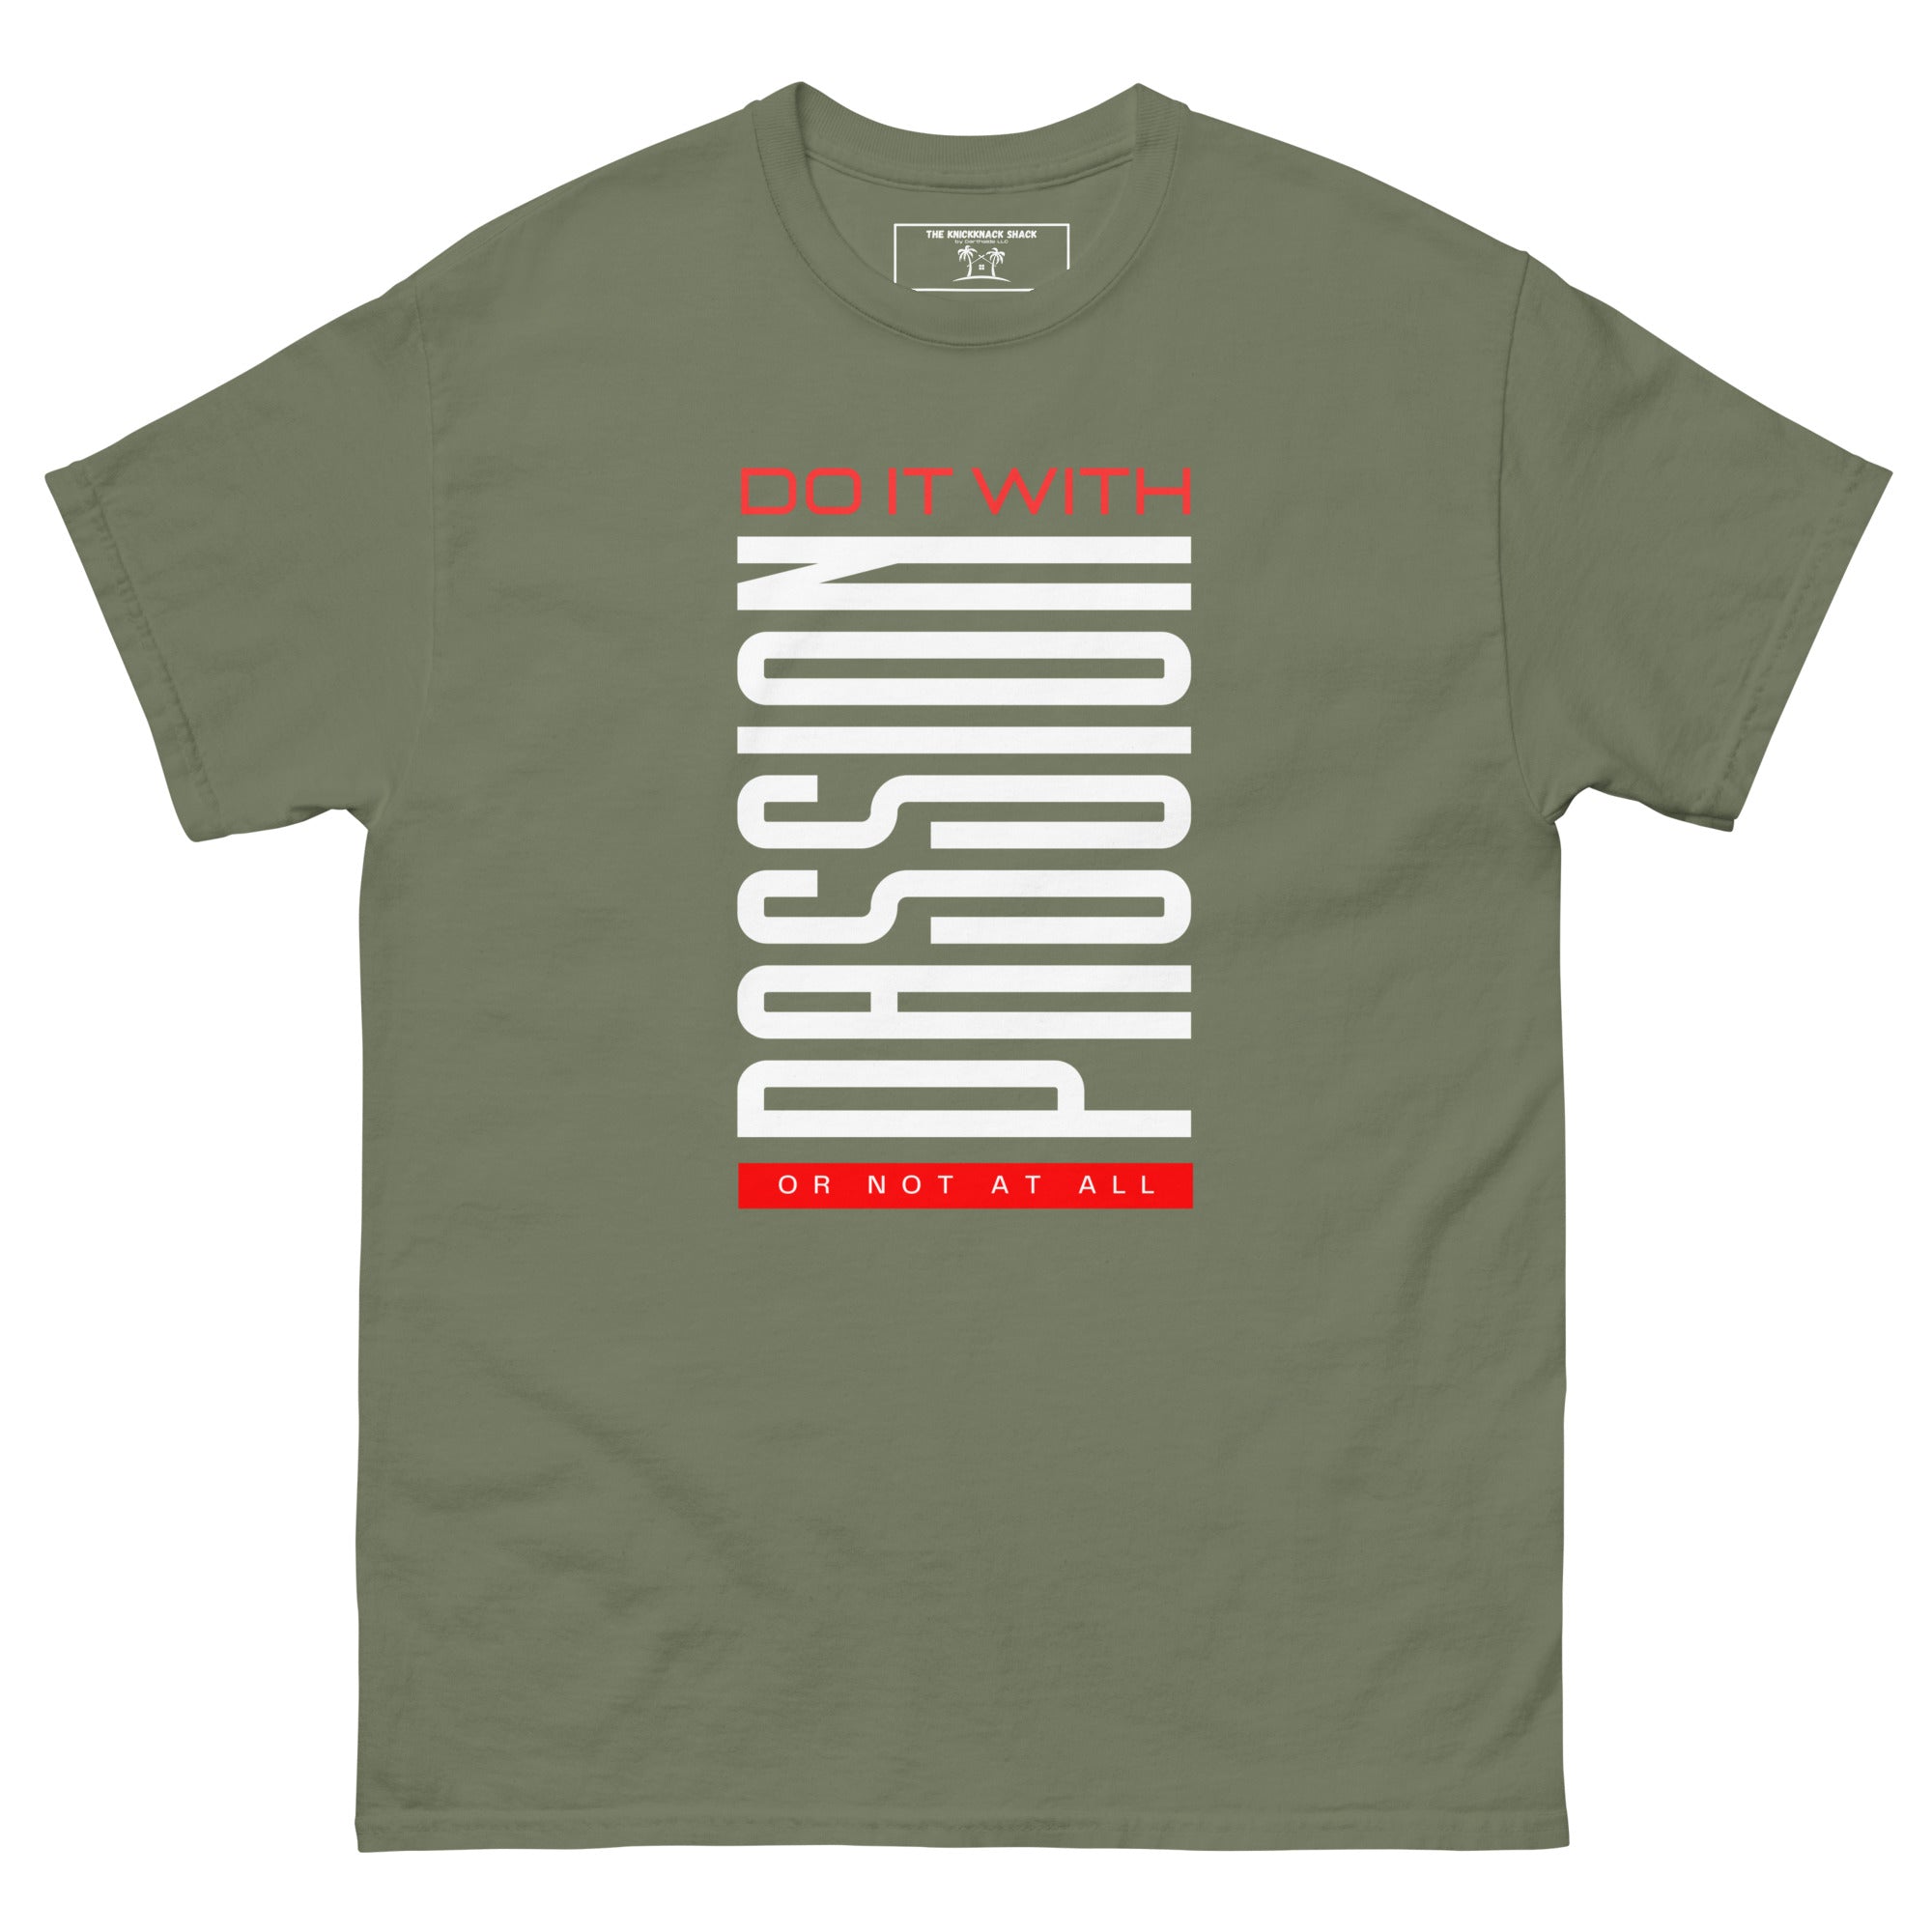 Classic Tee - Do It With Passion (Dark Colors)